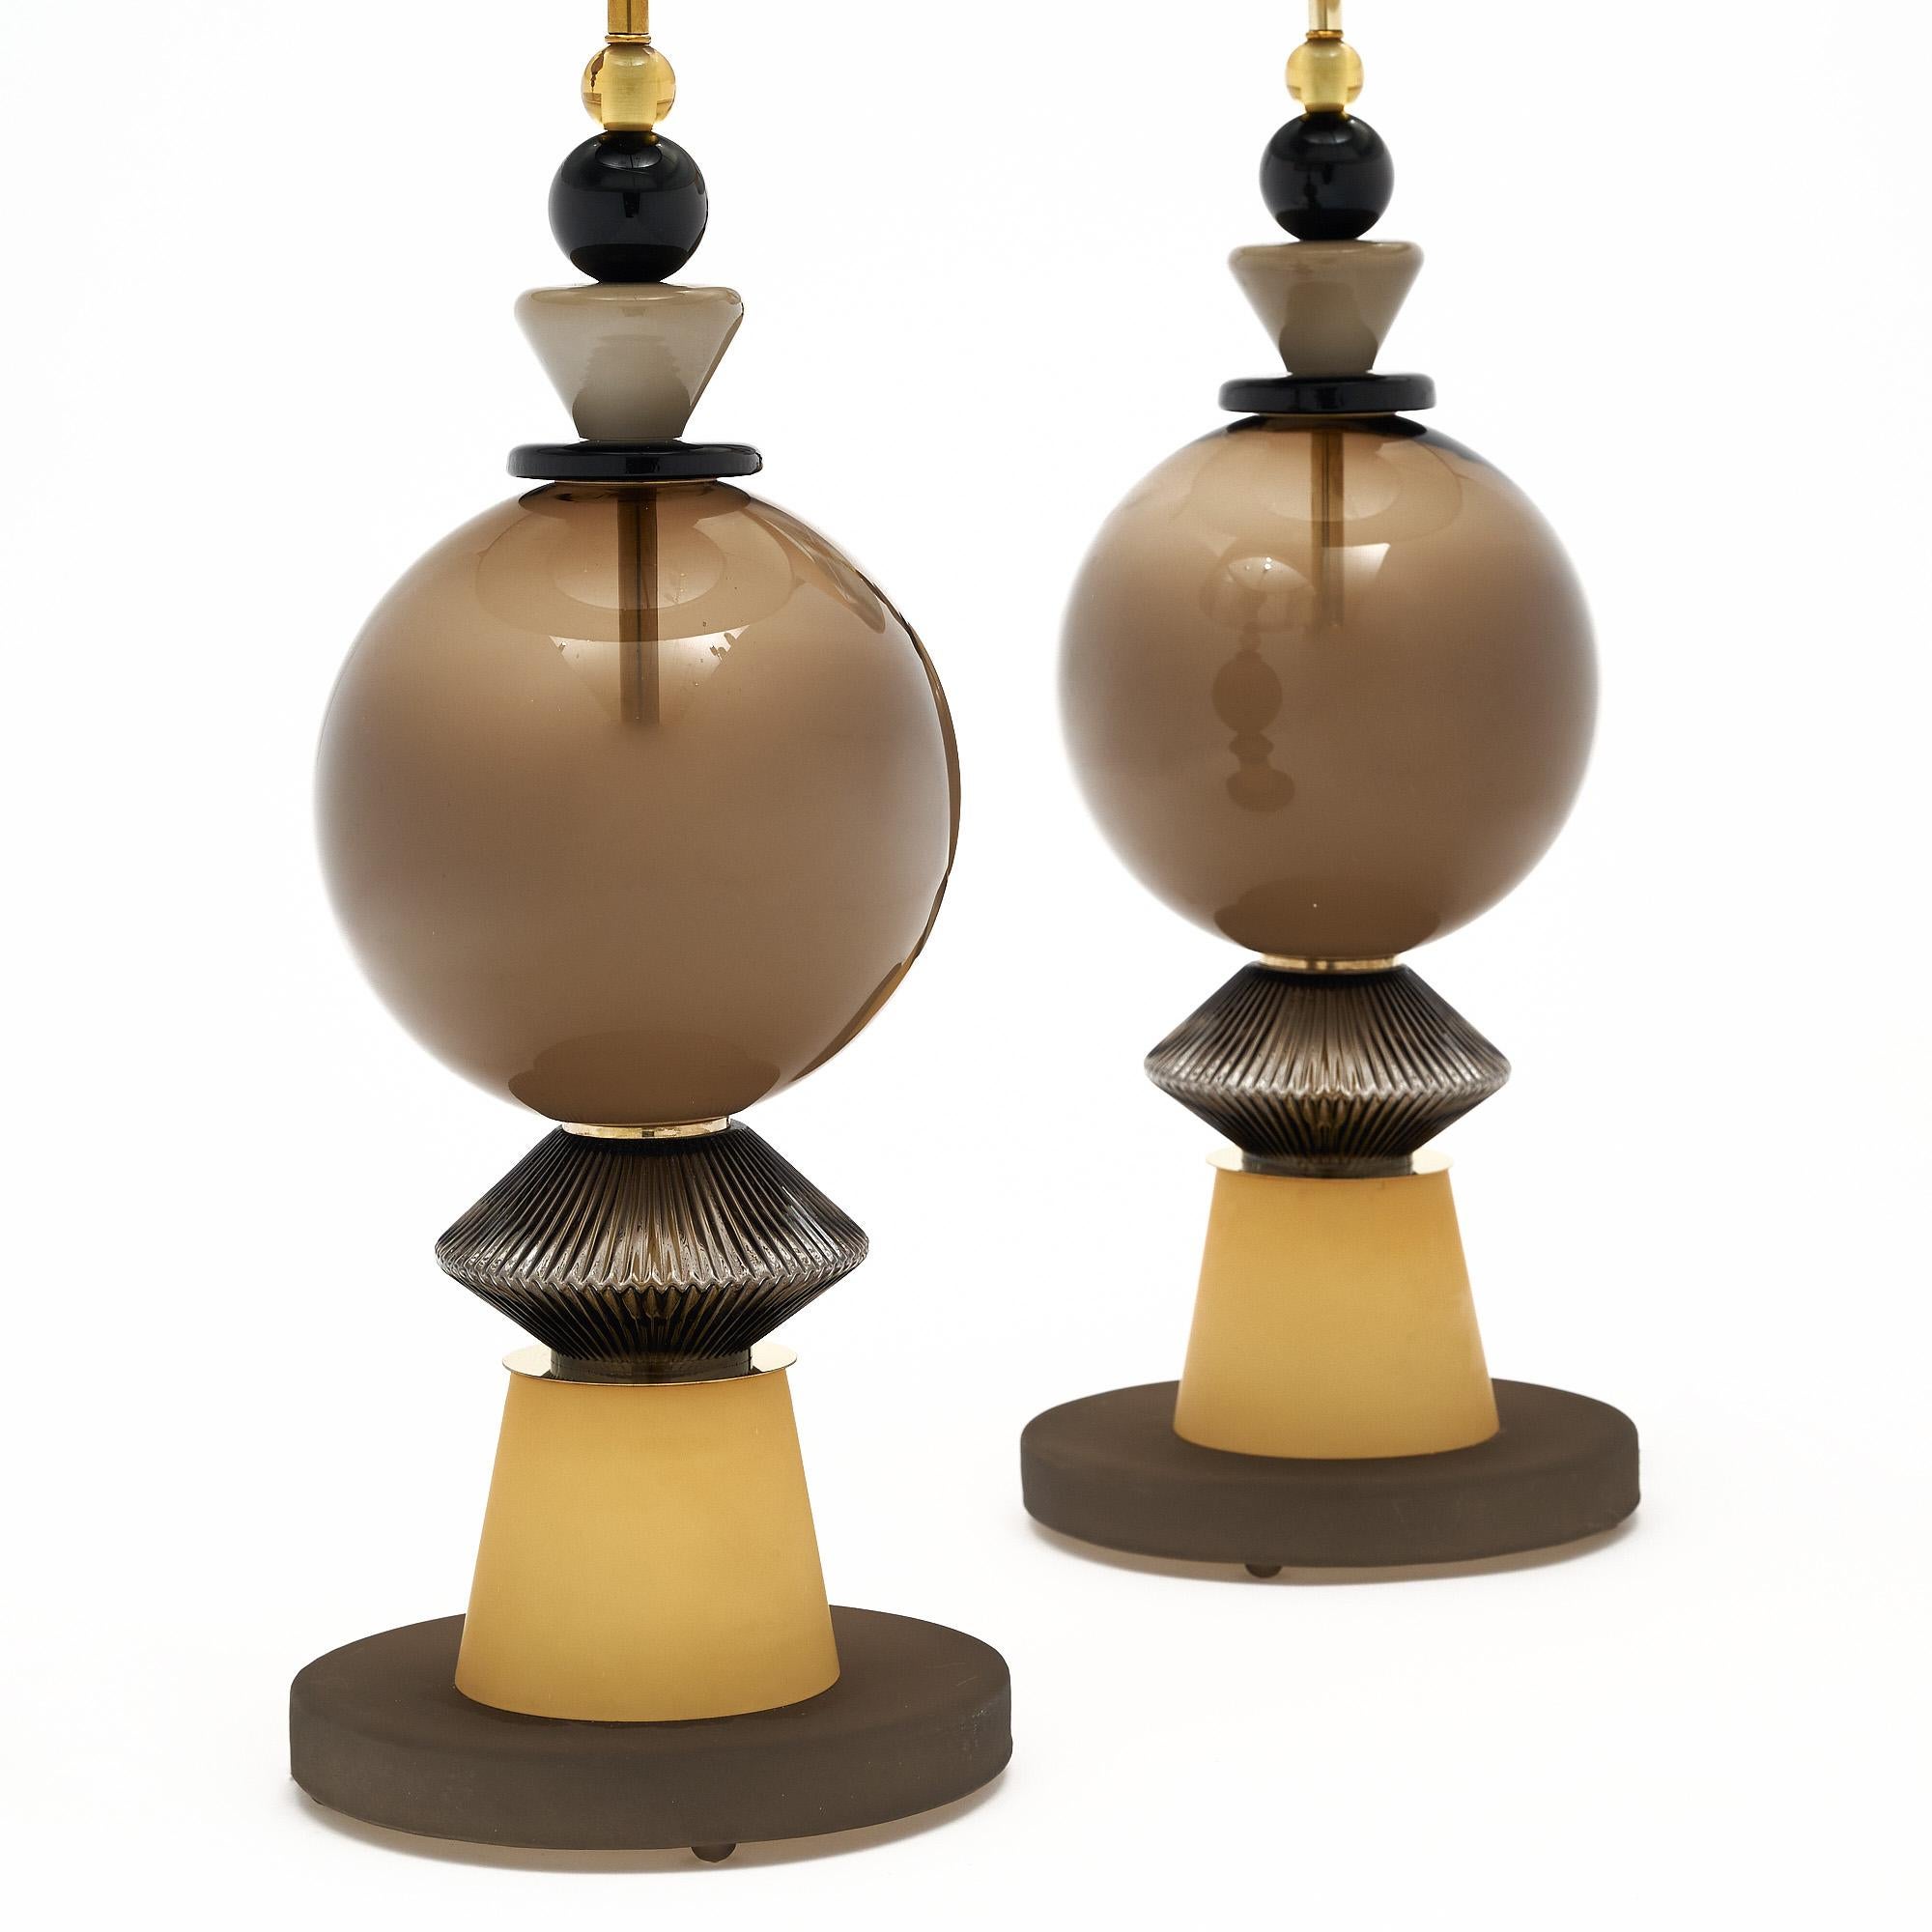 Pair of hand-blown Murano glass lamps featuring unique glass components supported on a brass structure. In the style of iconic Italian designer Ettore Sottsass. We love the taupe and black tones of the geometric formed glass. The gold shades are